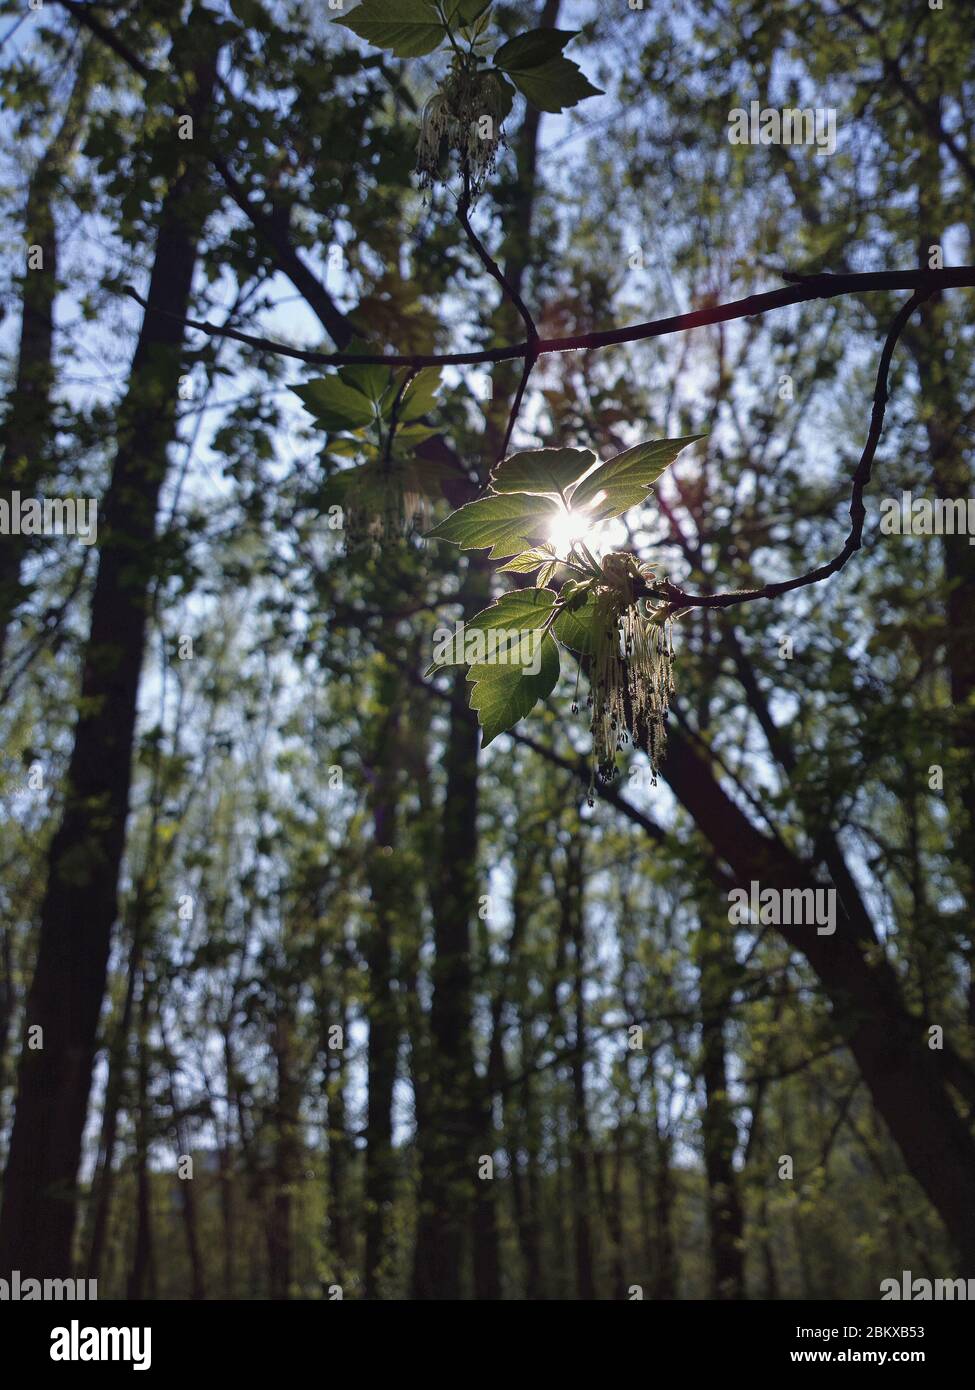 The sun shines through the branches of the trees. A branch with leaves against the blue sky in focus. Spring sun on a Sunny day. Stock Photo